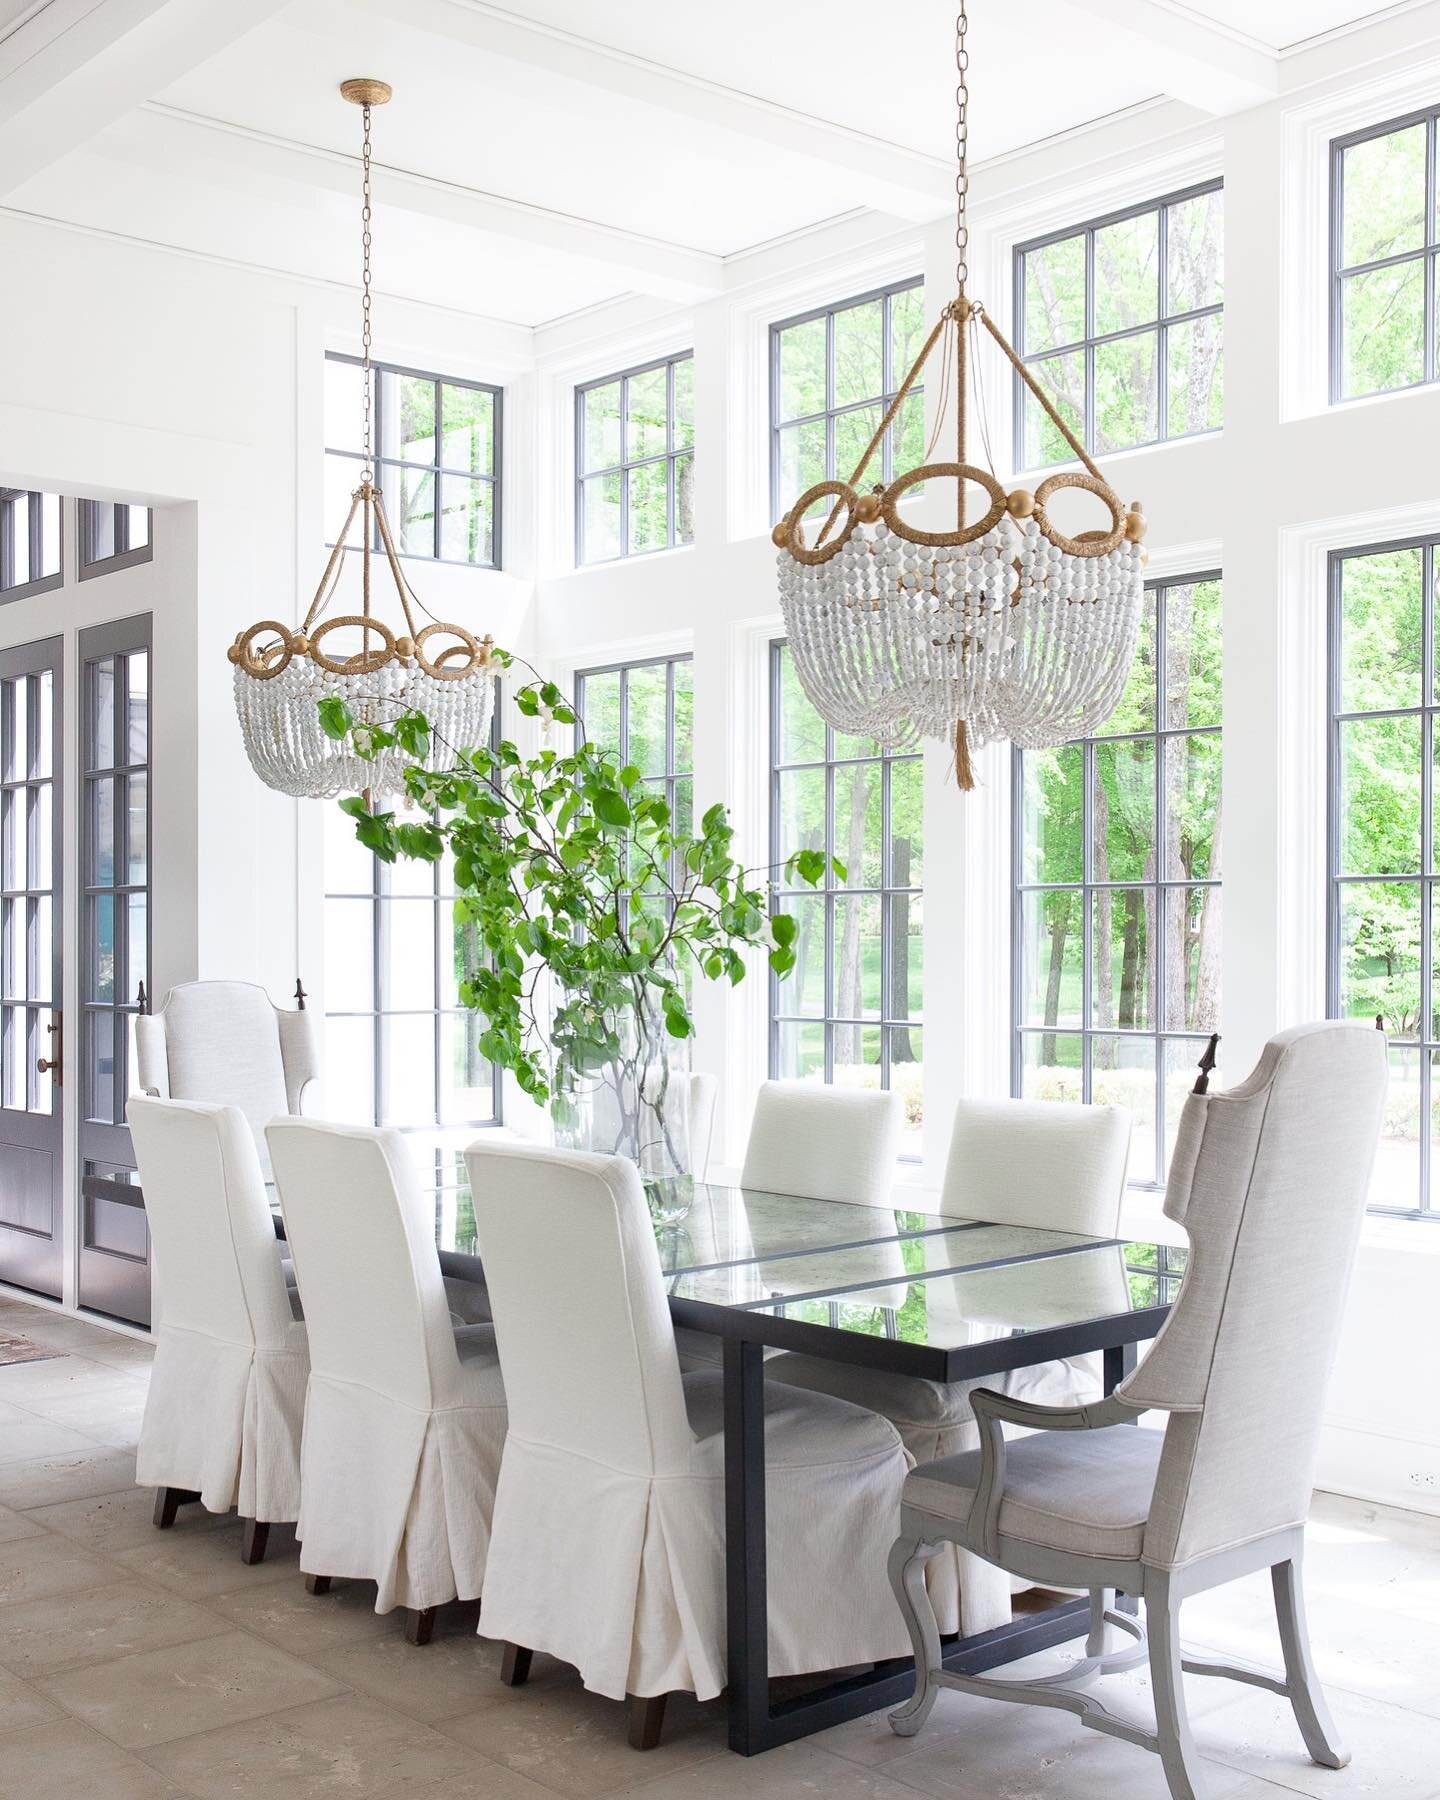 Natural light adds such an ethereal feel to any space. This mirrored table top paired with these elegant beaded chandeliers add so much interest to this dining room! 
&bull;
&bull;
&bull;
&bull;
&bull;
&bull;
#carolineallisonphotography #nashvilledes